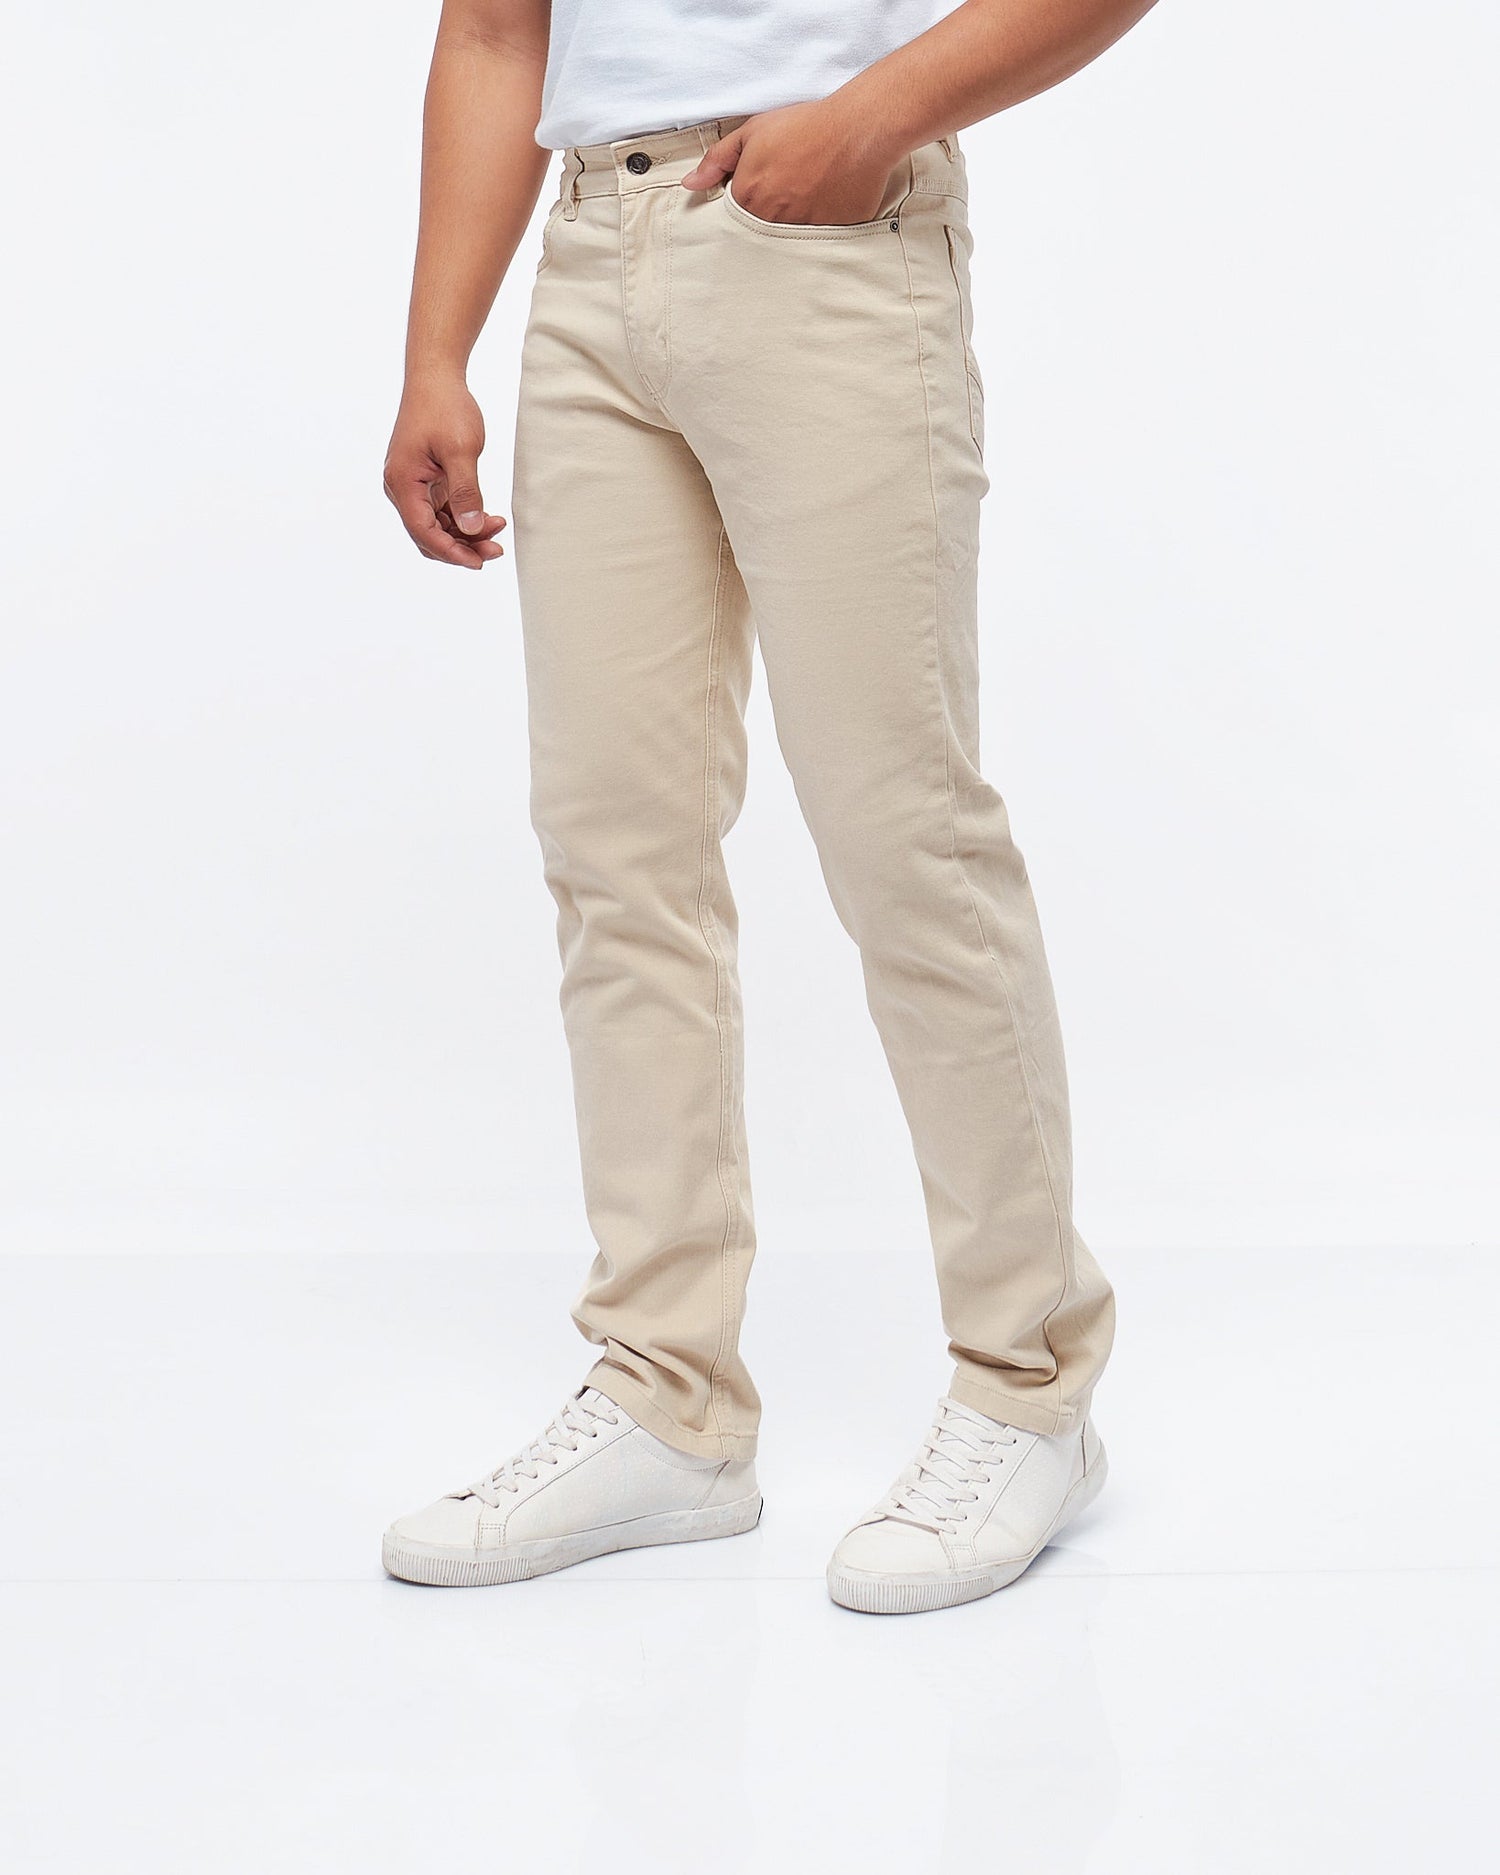 MOI OUTFIT-Soft Stretchy Men Jeans 24.90